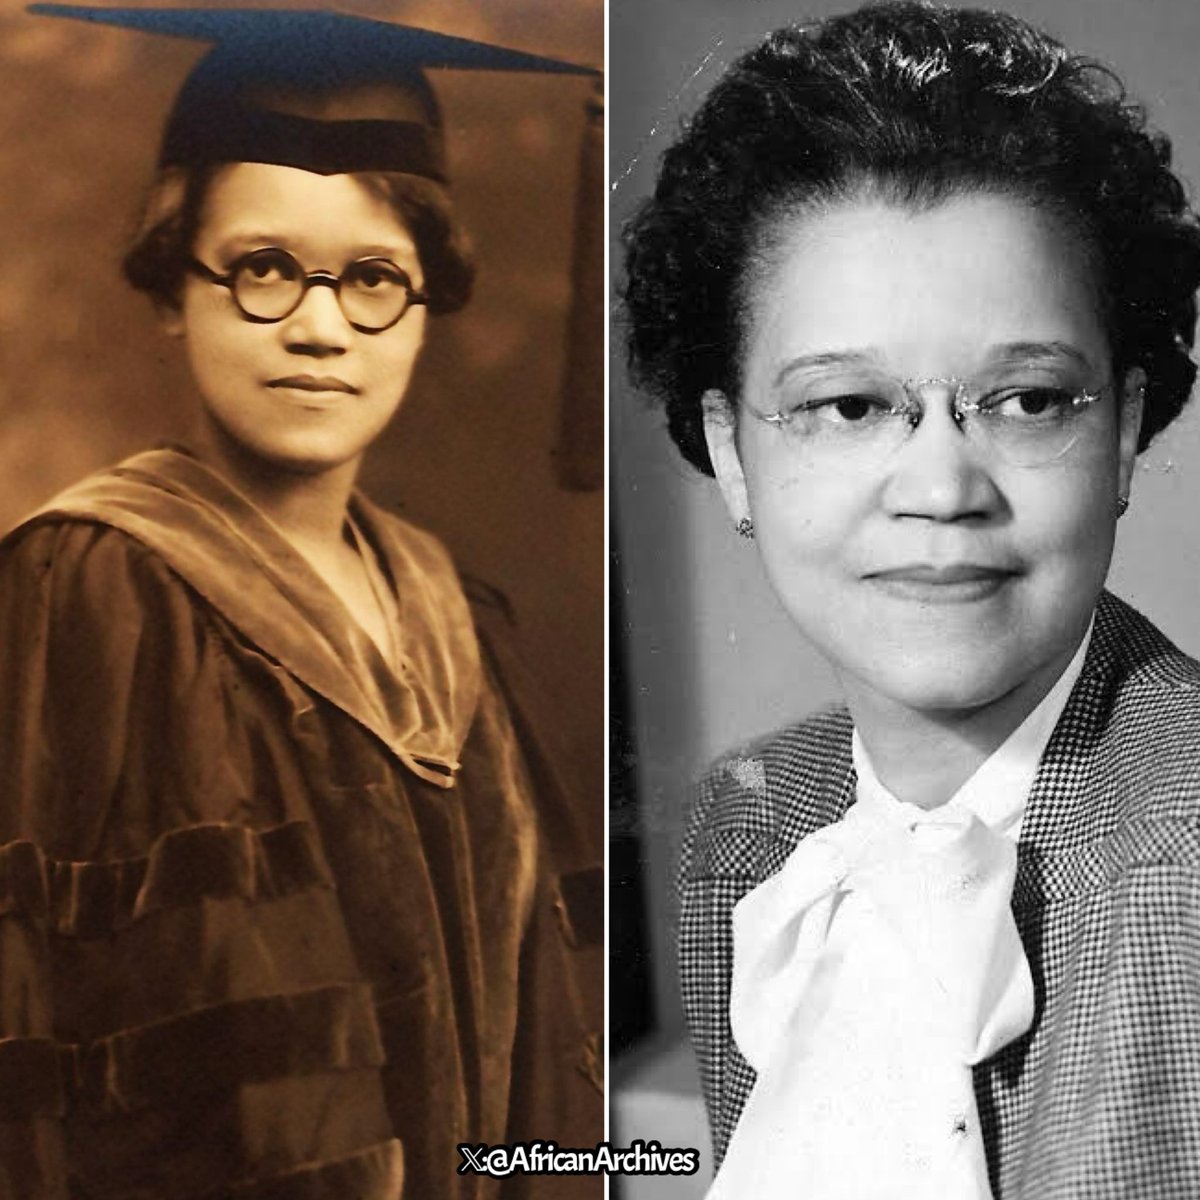 Sadie Alexander, the first black woman economist. She became the first Black woman in the U.S. to earn a doctorate degree in economics in 1921.

Sadie came from a family with a rich history of academic achievement. Her father was the first black American to graduate from the